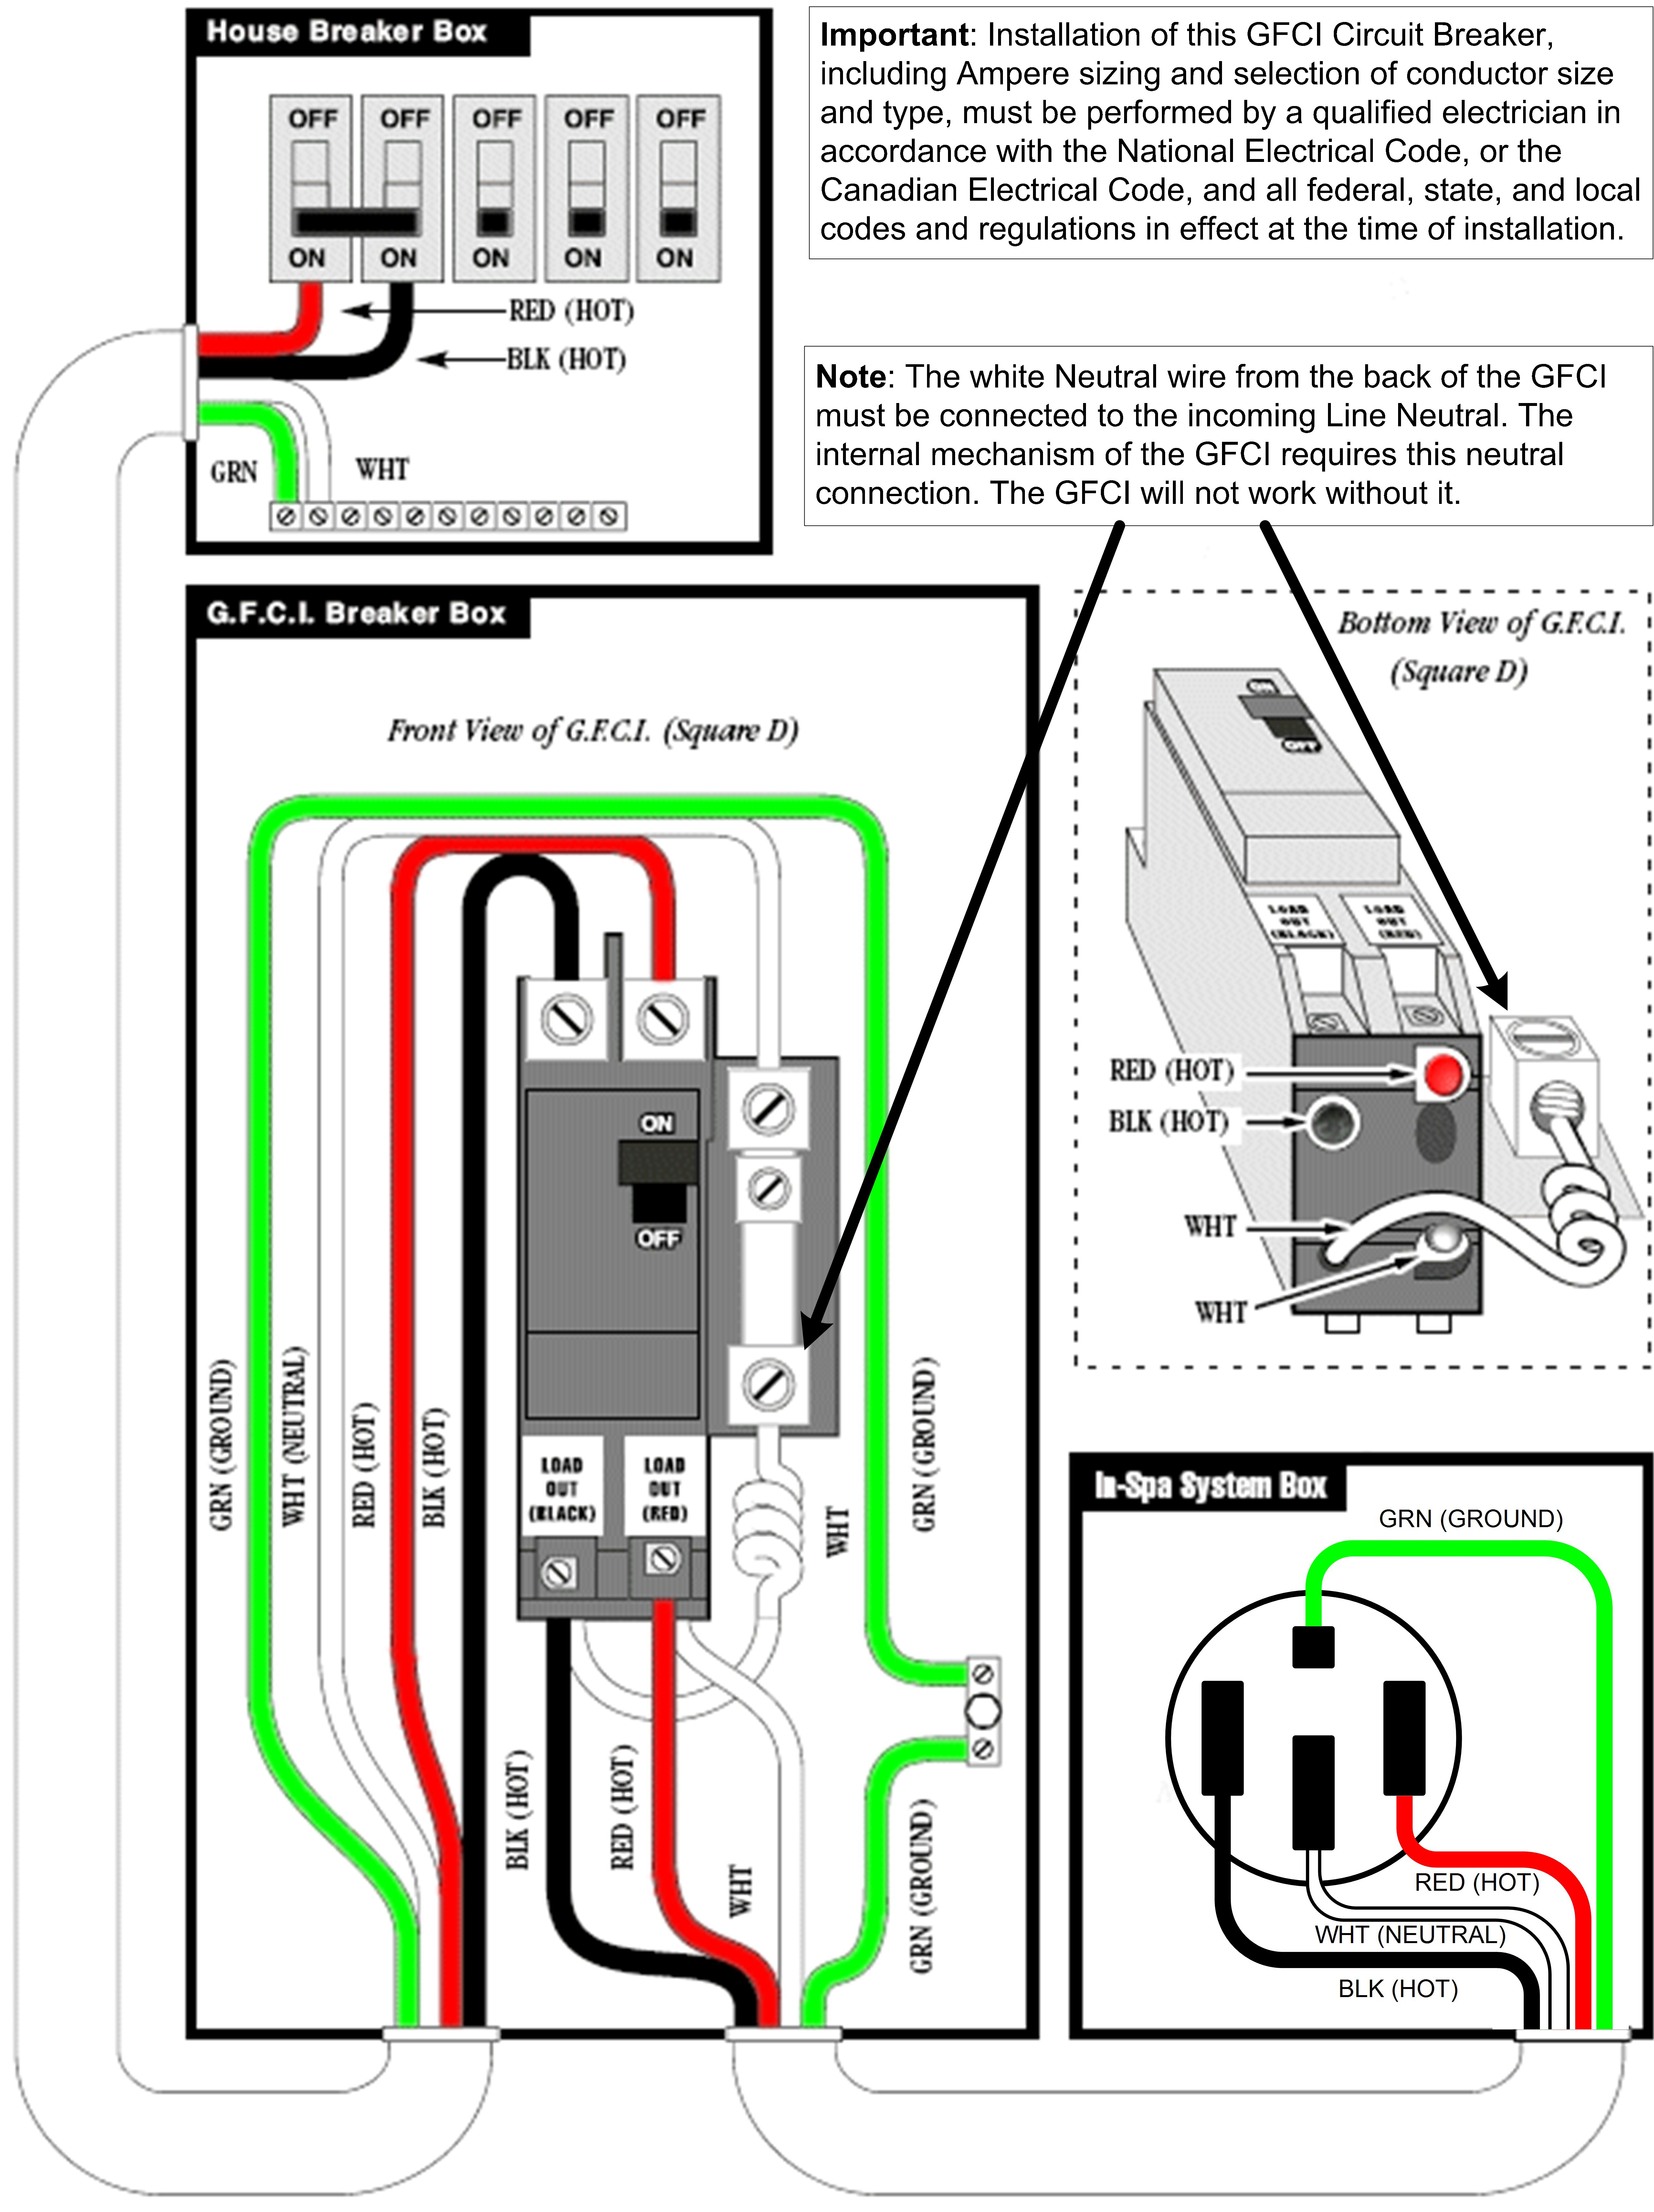 How To Wire A Hot Tub Gfci Breaker - lysanns